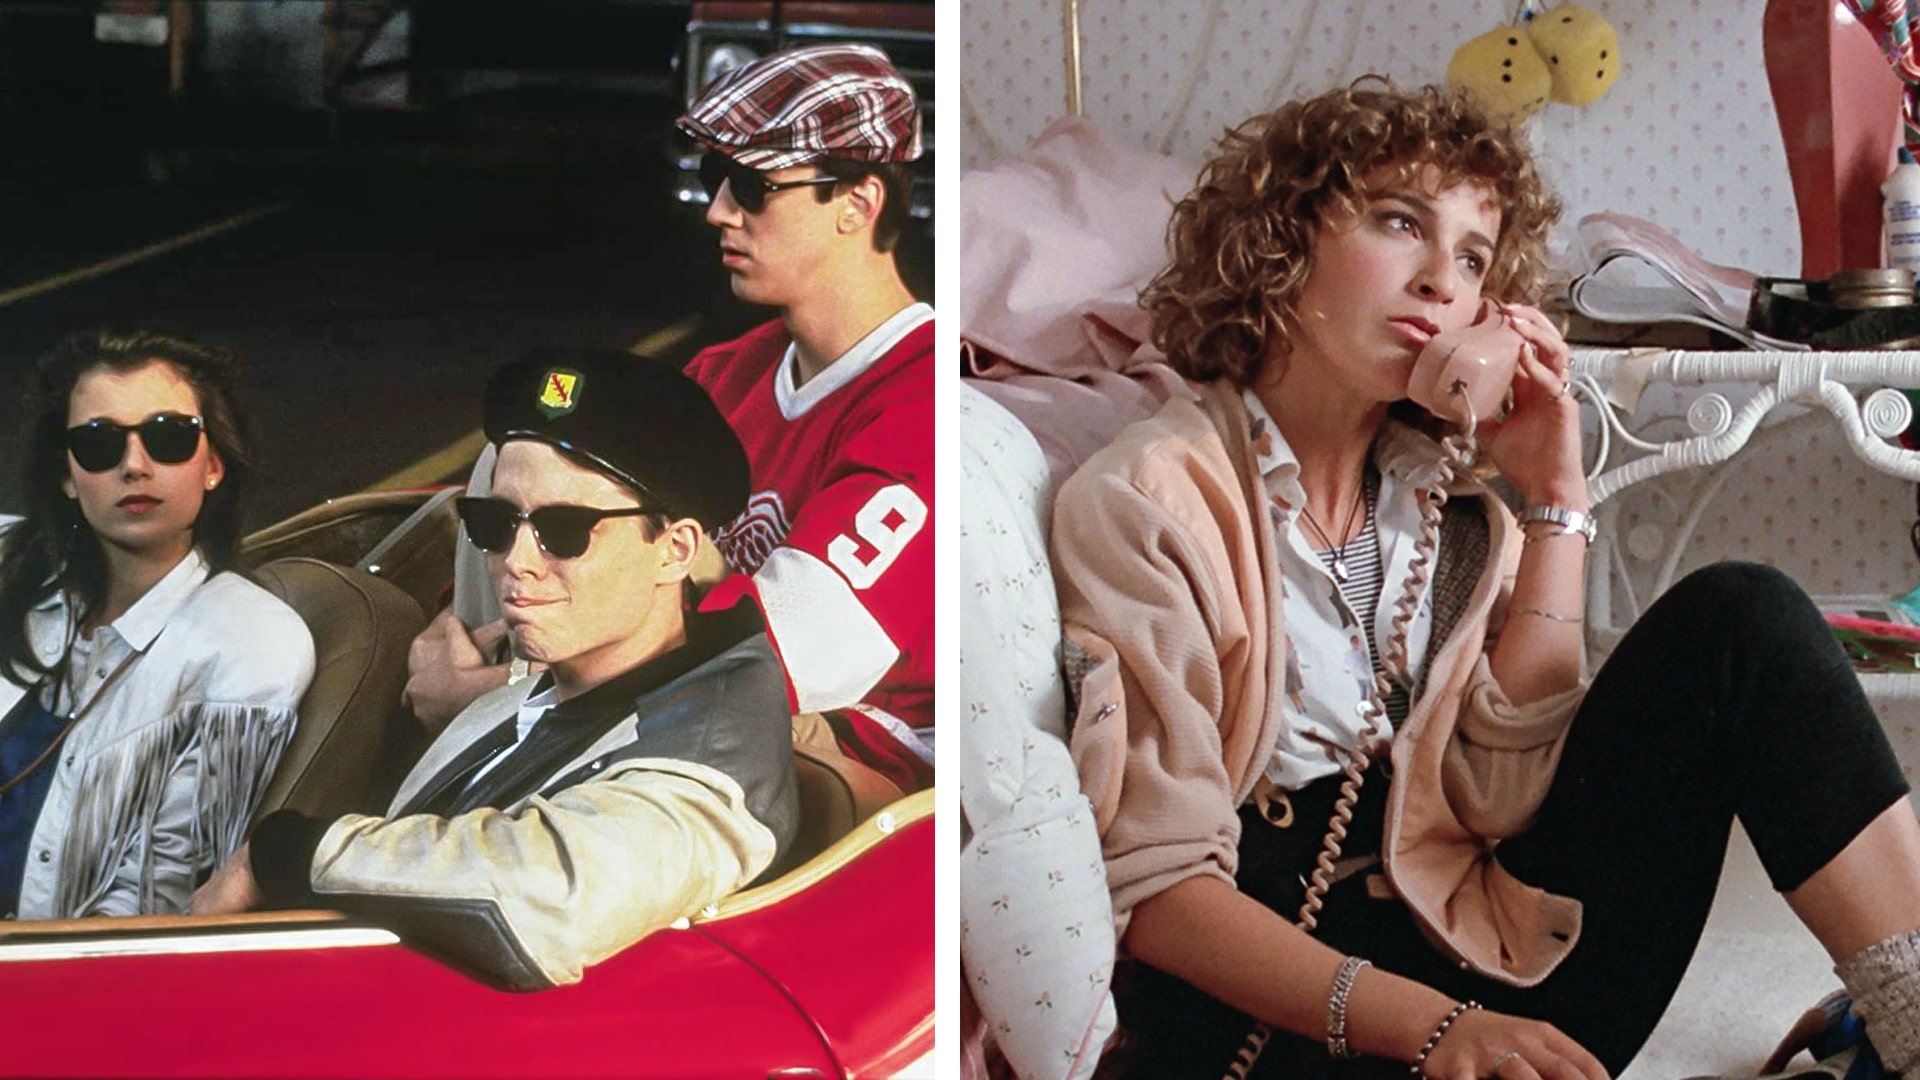 15 Fun Facts About 'Ferris Bueller's Day Off